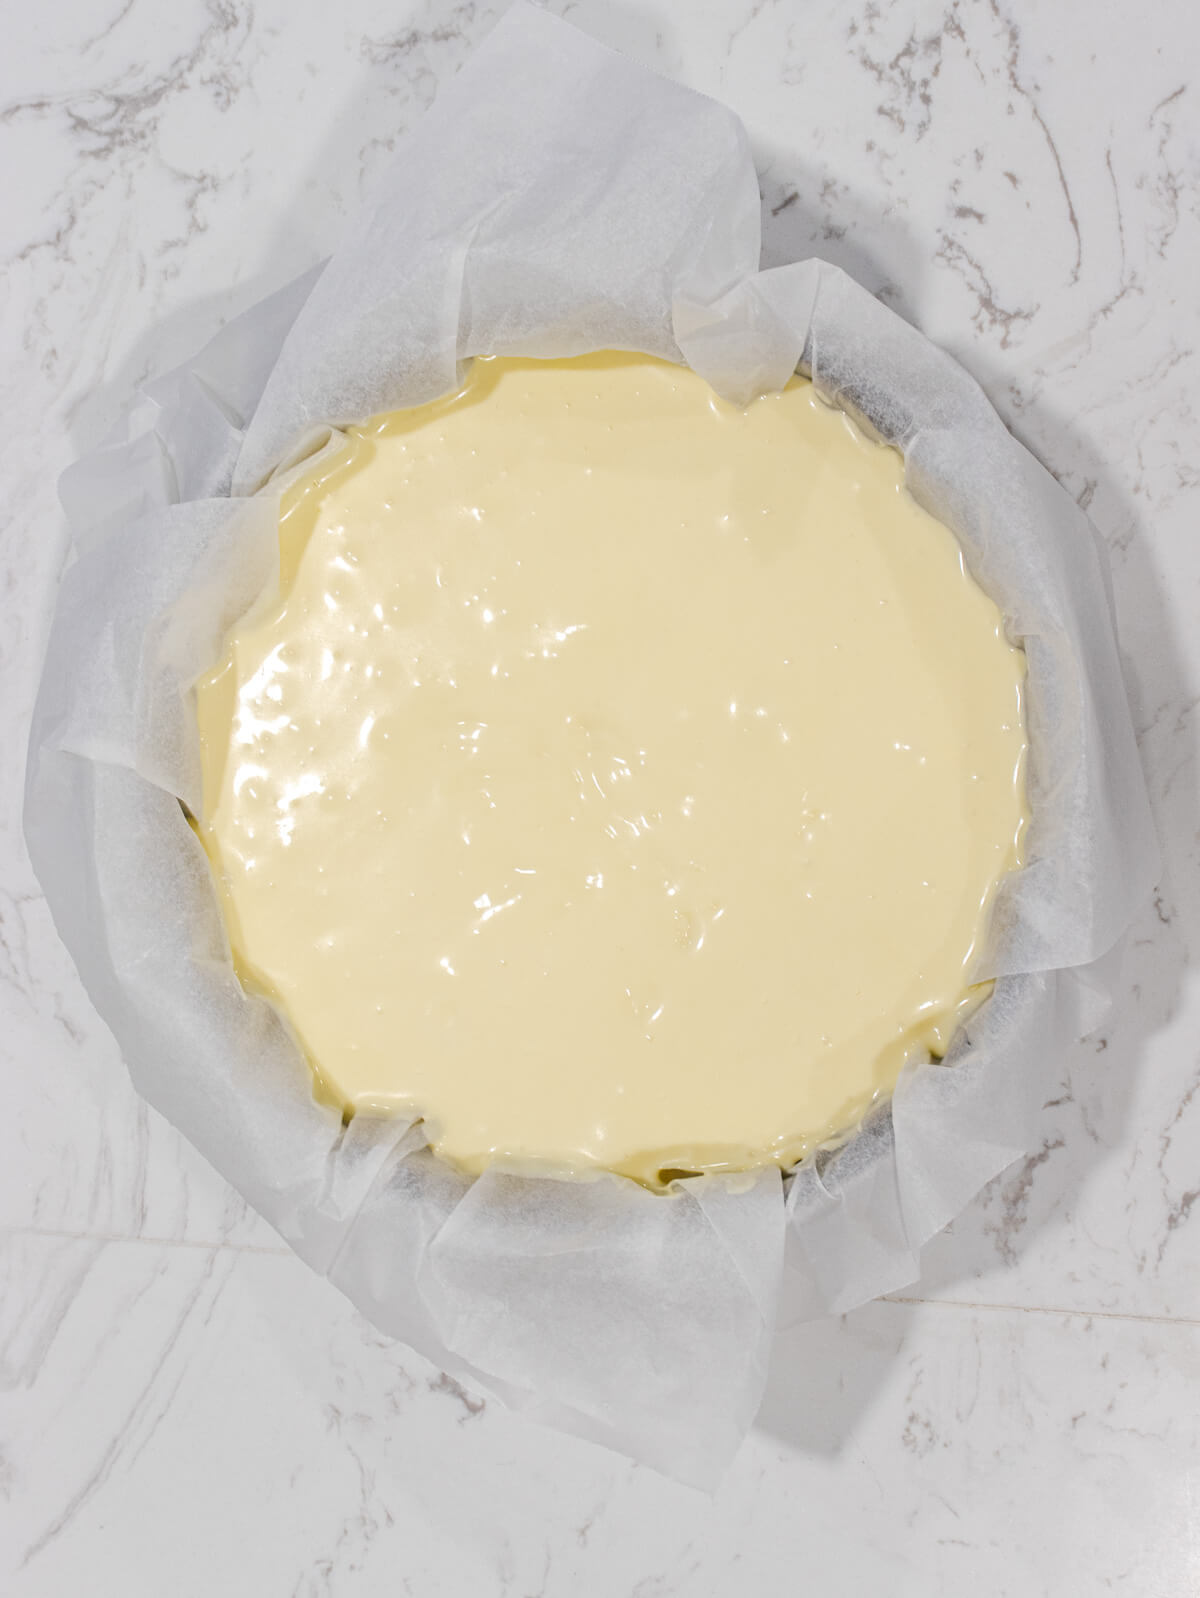 Creamy cheesecake batter in a parchment lined springform pan.